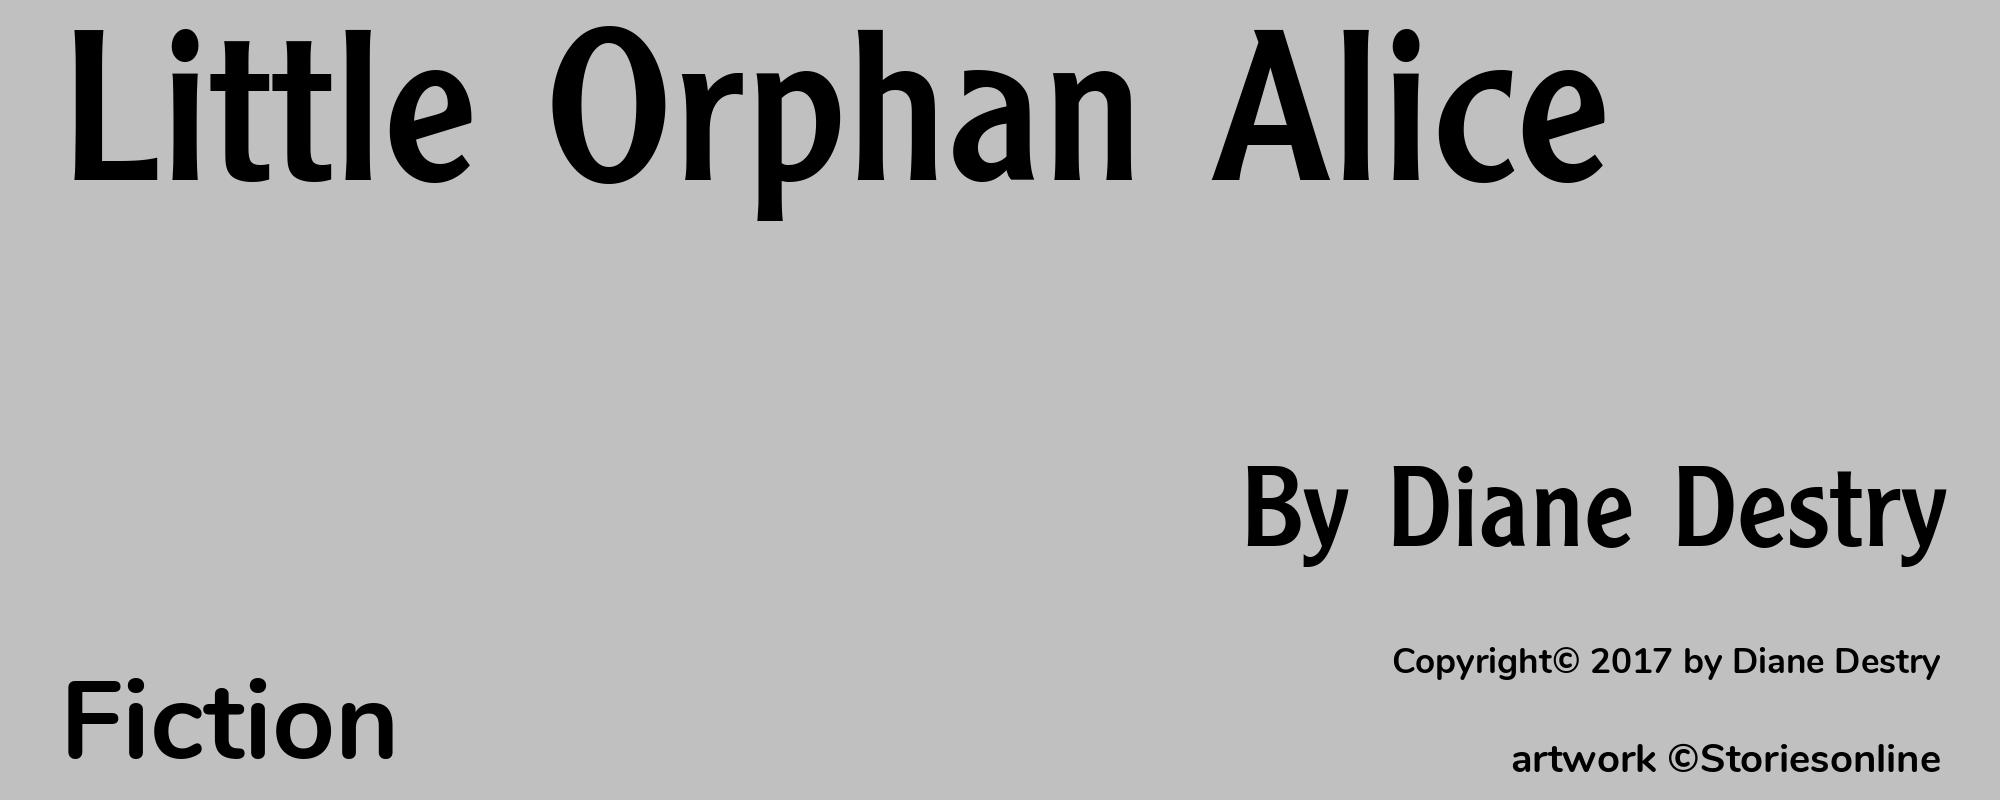 Little Orphan Alice - Cover